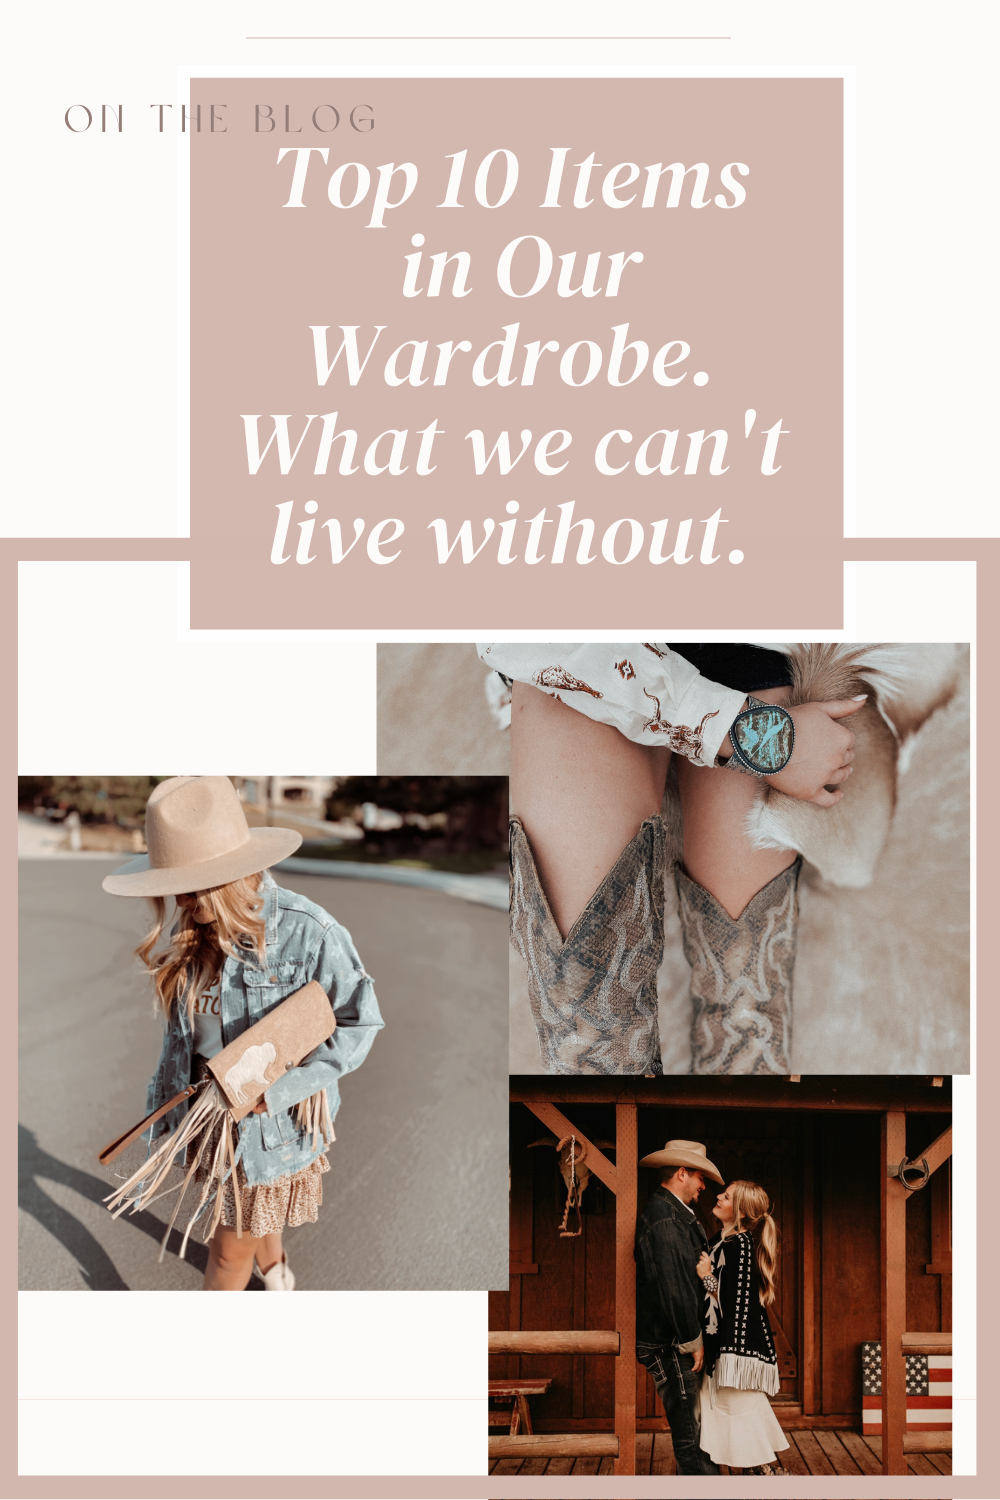 Top 10 Items in Our Wardrobe! What we can't do without.